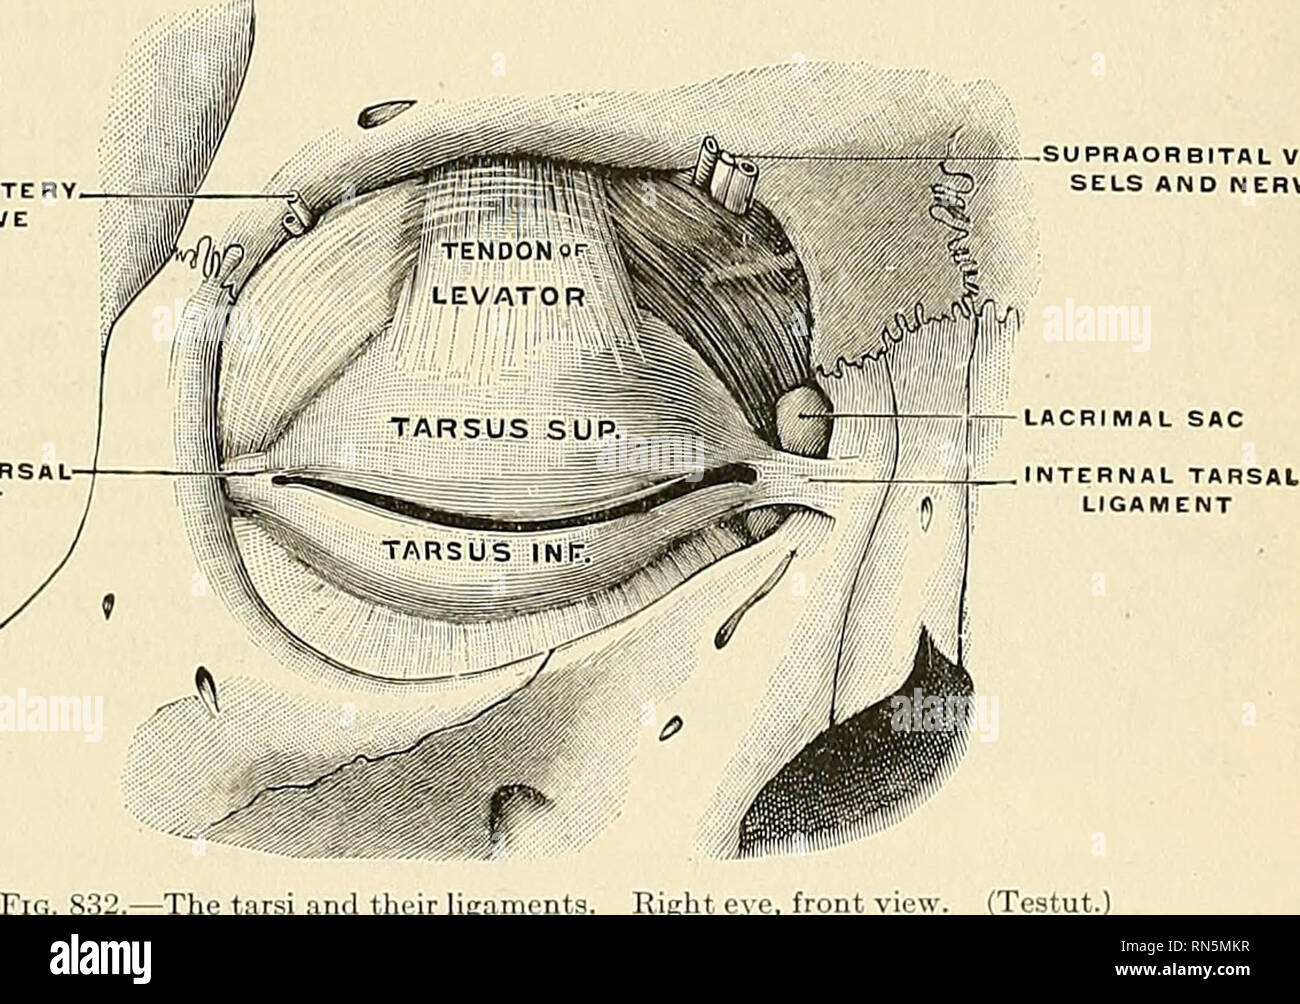 . Anatomy, descriptive and applied. Anatomy. THE APPENDAGES OF THE EYE 1113 margins, the angles of which eorrespond to tlie junction of the upper and lower lids, and are called canthi. The outer canthus (commissura palpebrarum laterallii) is more acute than the inner, and the lids here lie in close contact with the globe; but the inner canthus (commissura palpebrarum medialis) is prolonged for a short distance inward toward the nose, and the two lids are separated at the inner canthus by a triangular space, the lacus lacrimalis. At the commencement of the lacus lacrimalis, on the margin of eac Stock Photo